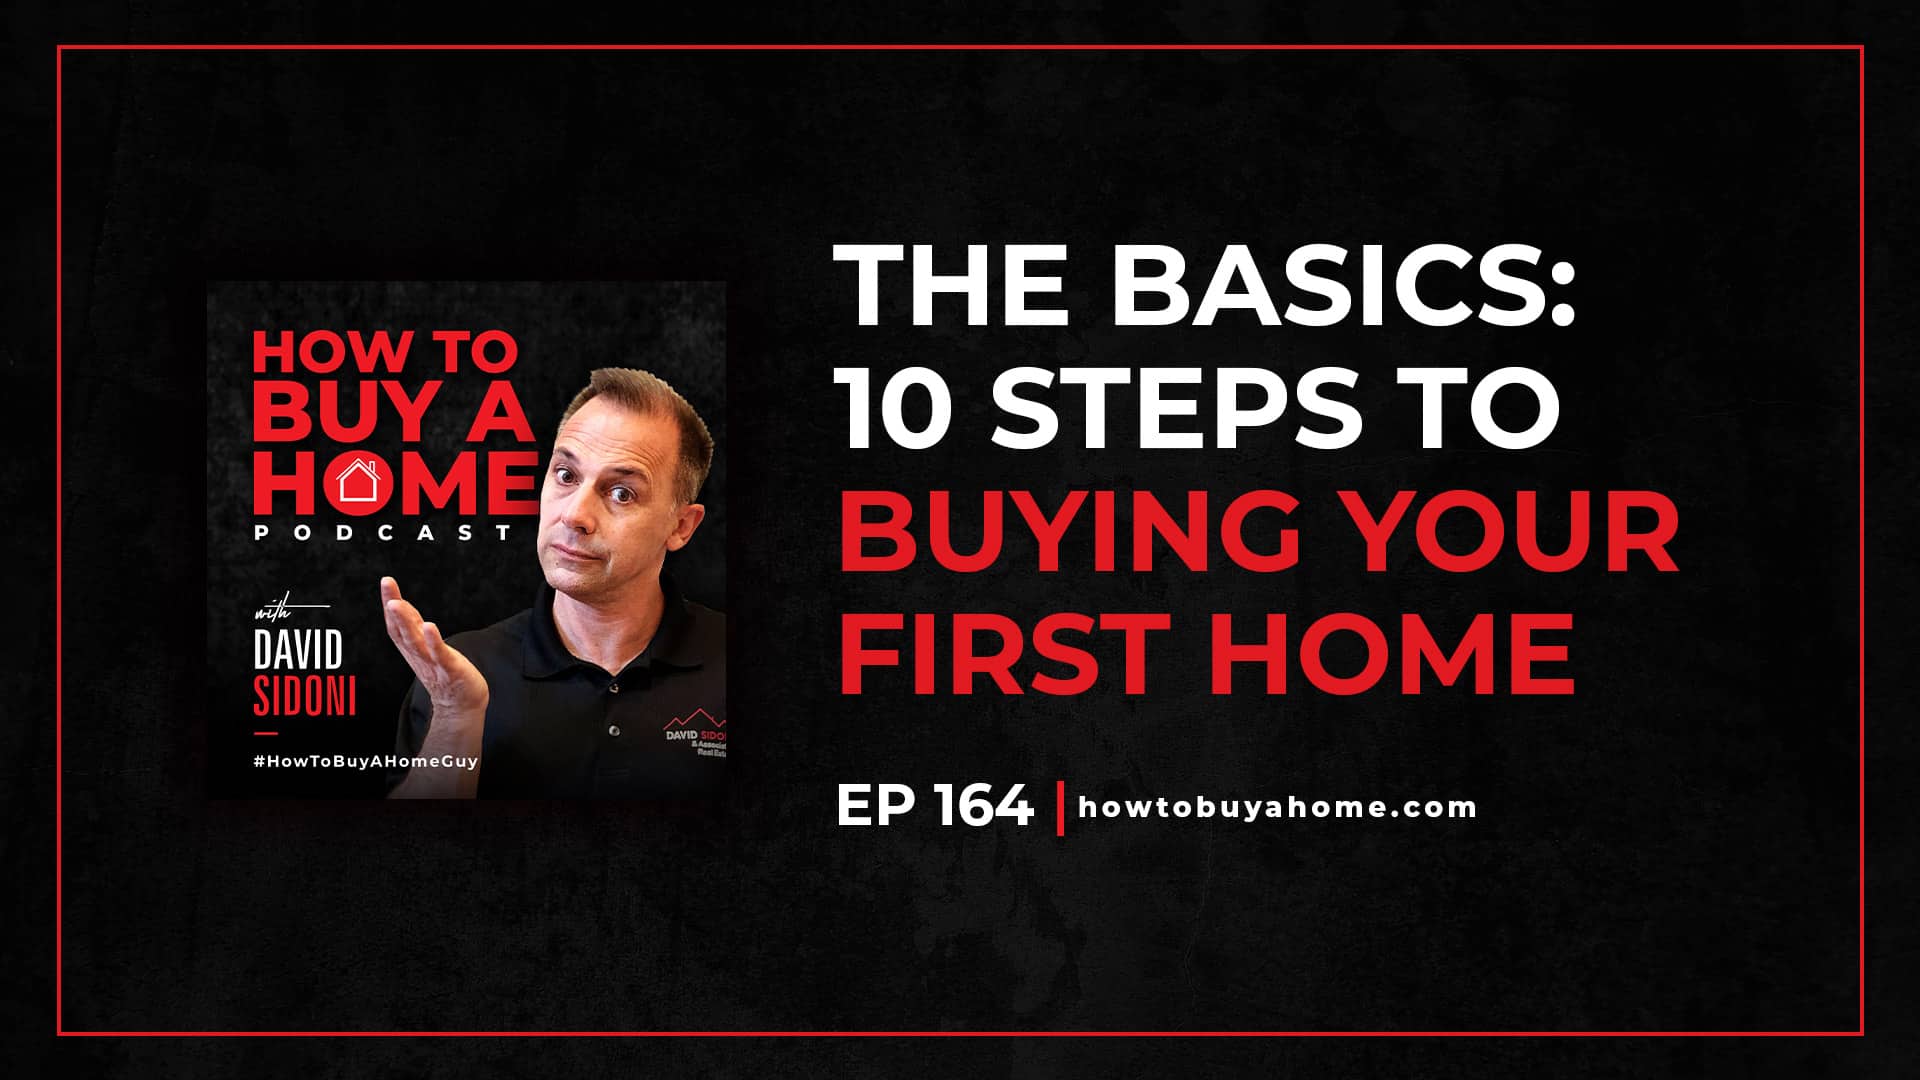 Ep. 164 - The Basics: 10 Steps to Buying Your First Home